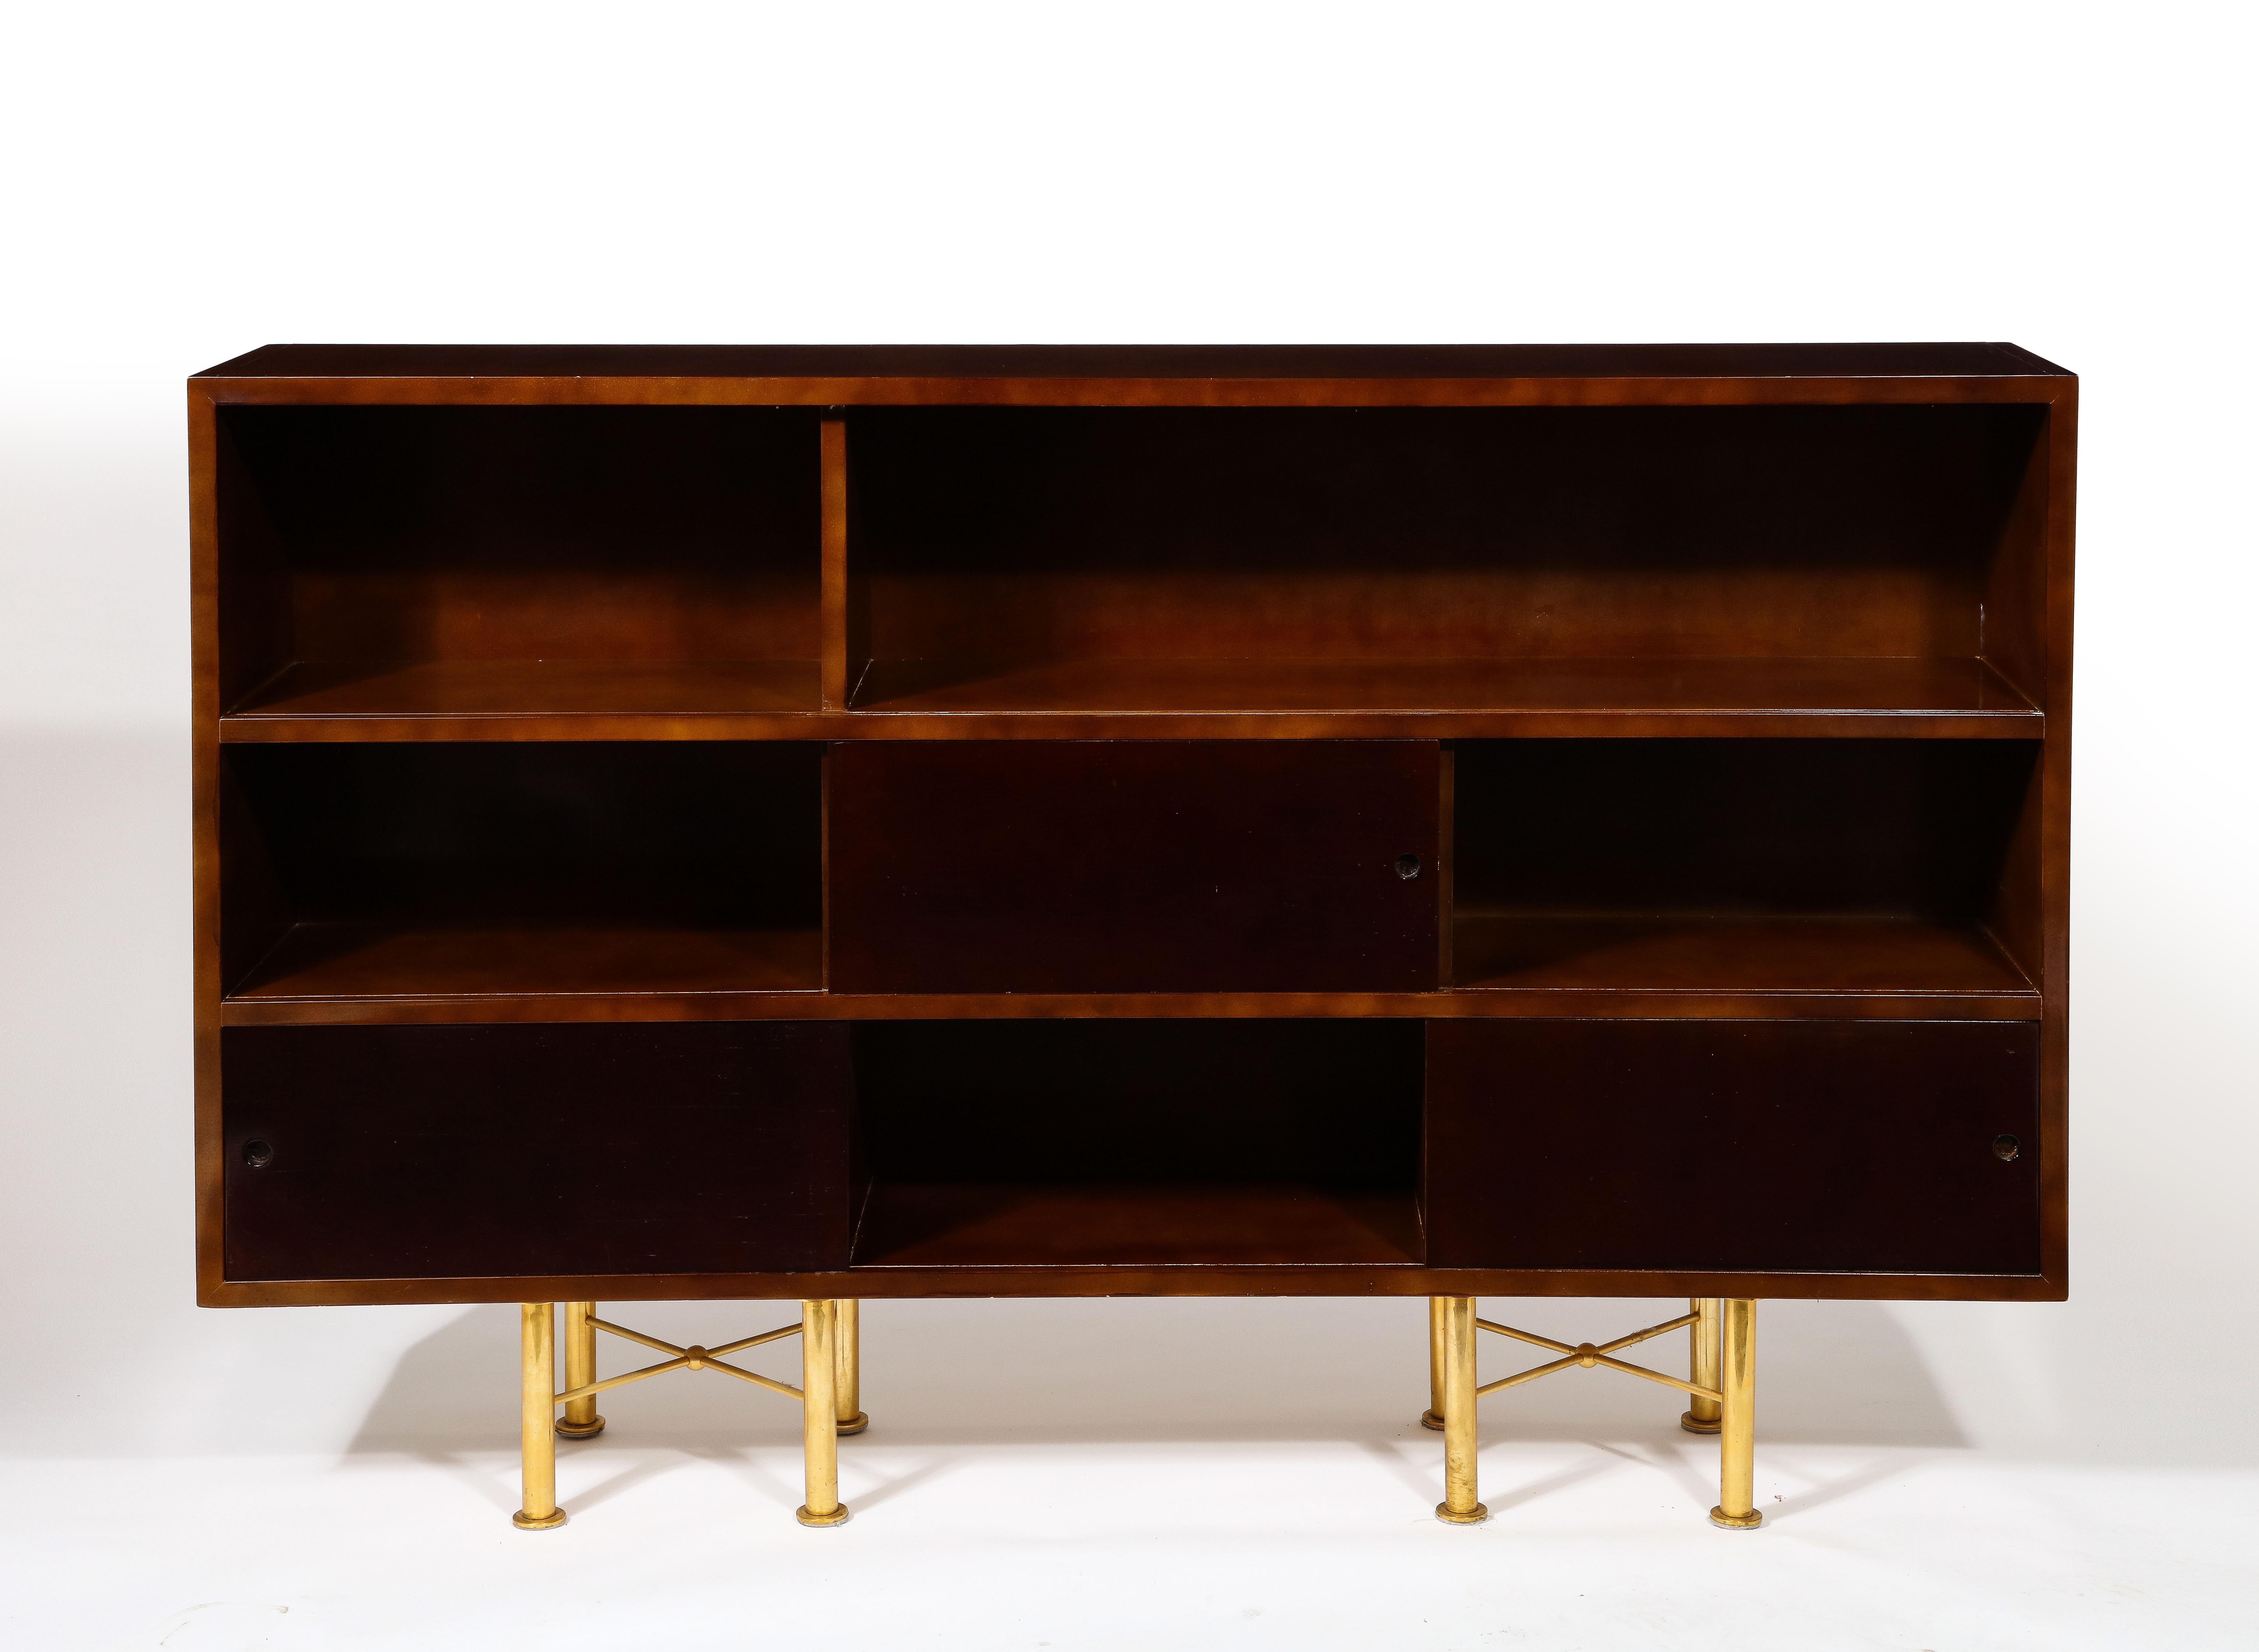 Exceptional Raphael bookcase in his signature Béka lacquer finish, a technique he championed that gave the lacquer an ombré appearance; it rests on gilt bronze legs, Signed on a brass plaque in the back. The unit can also be hung to the wall -in